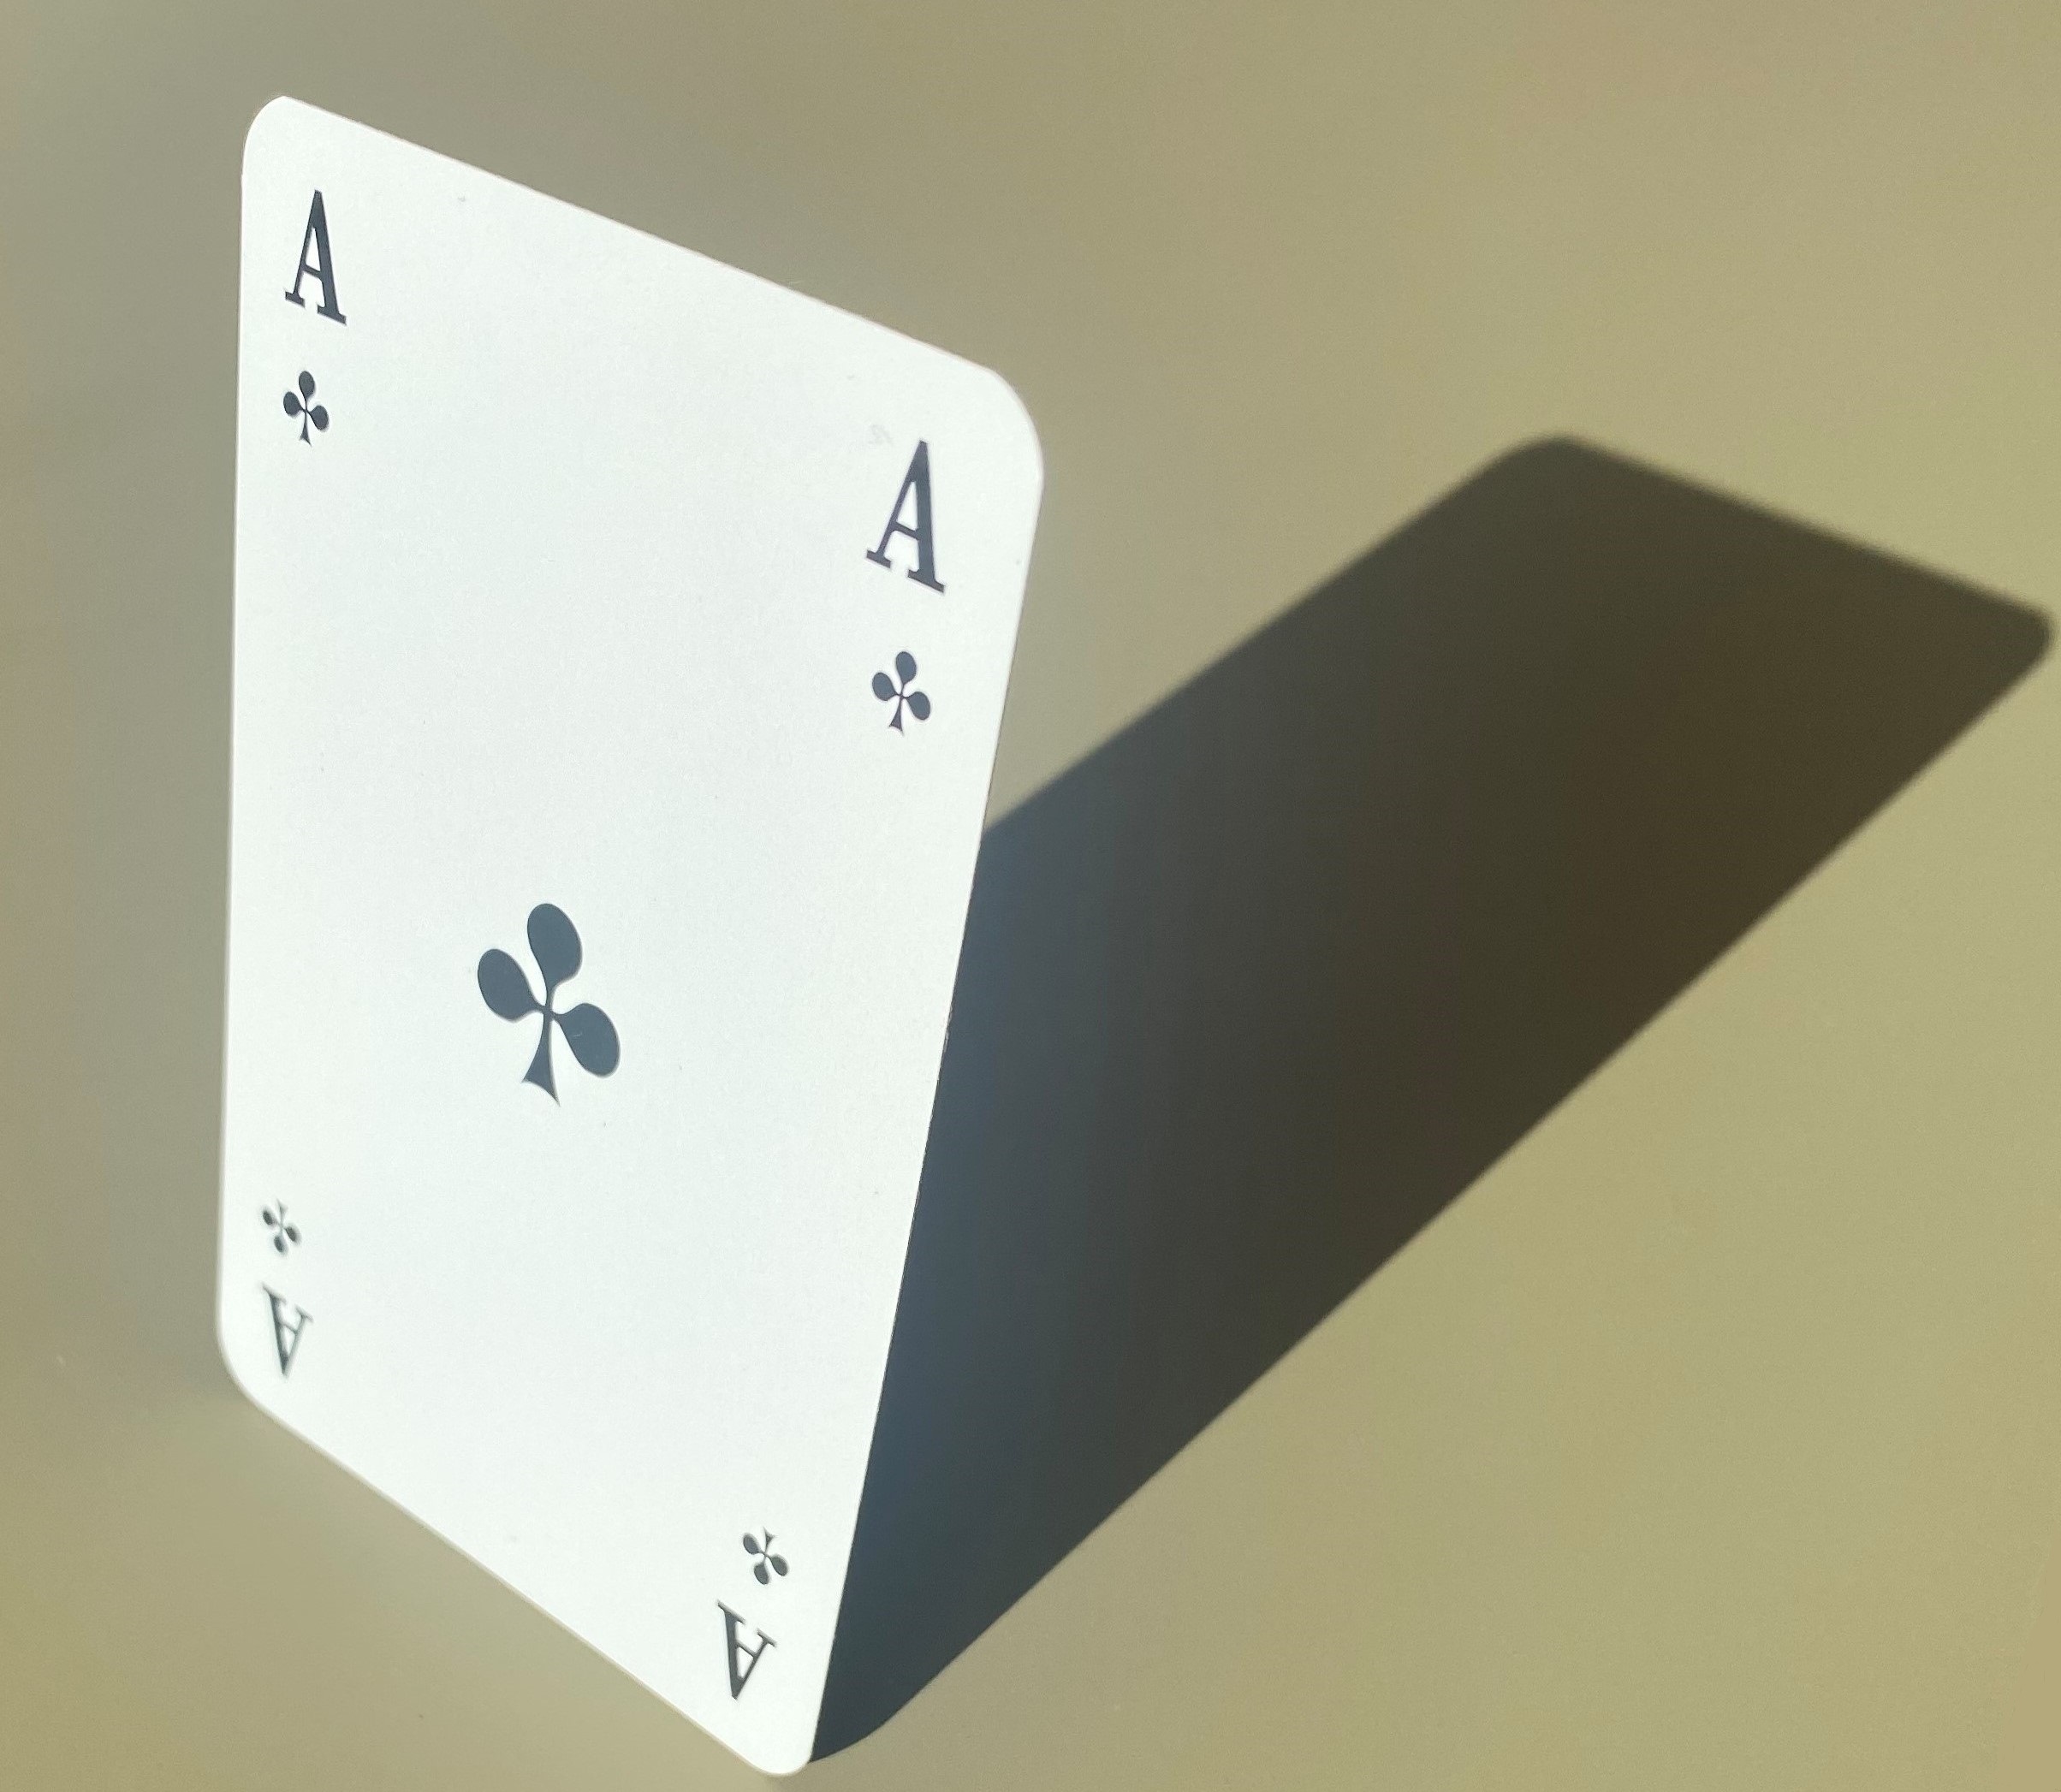 Ace of spades as symbol for luck 